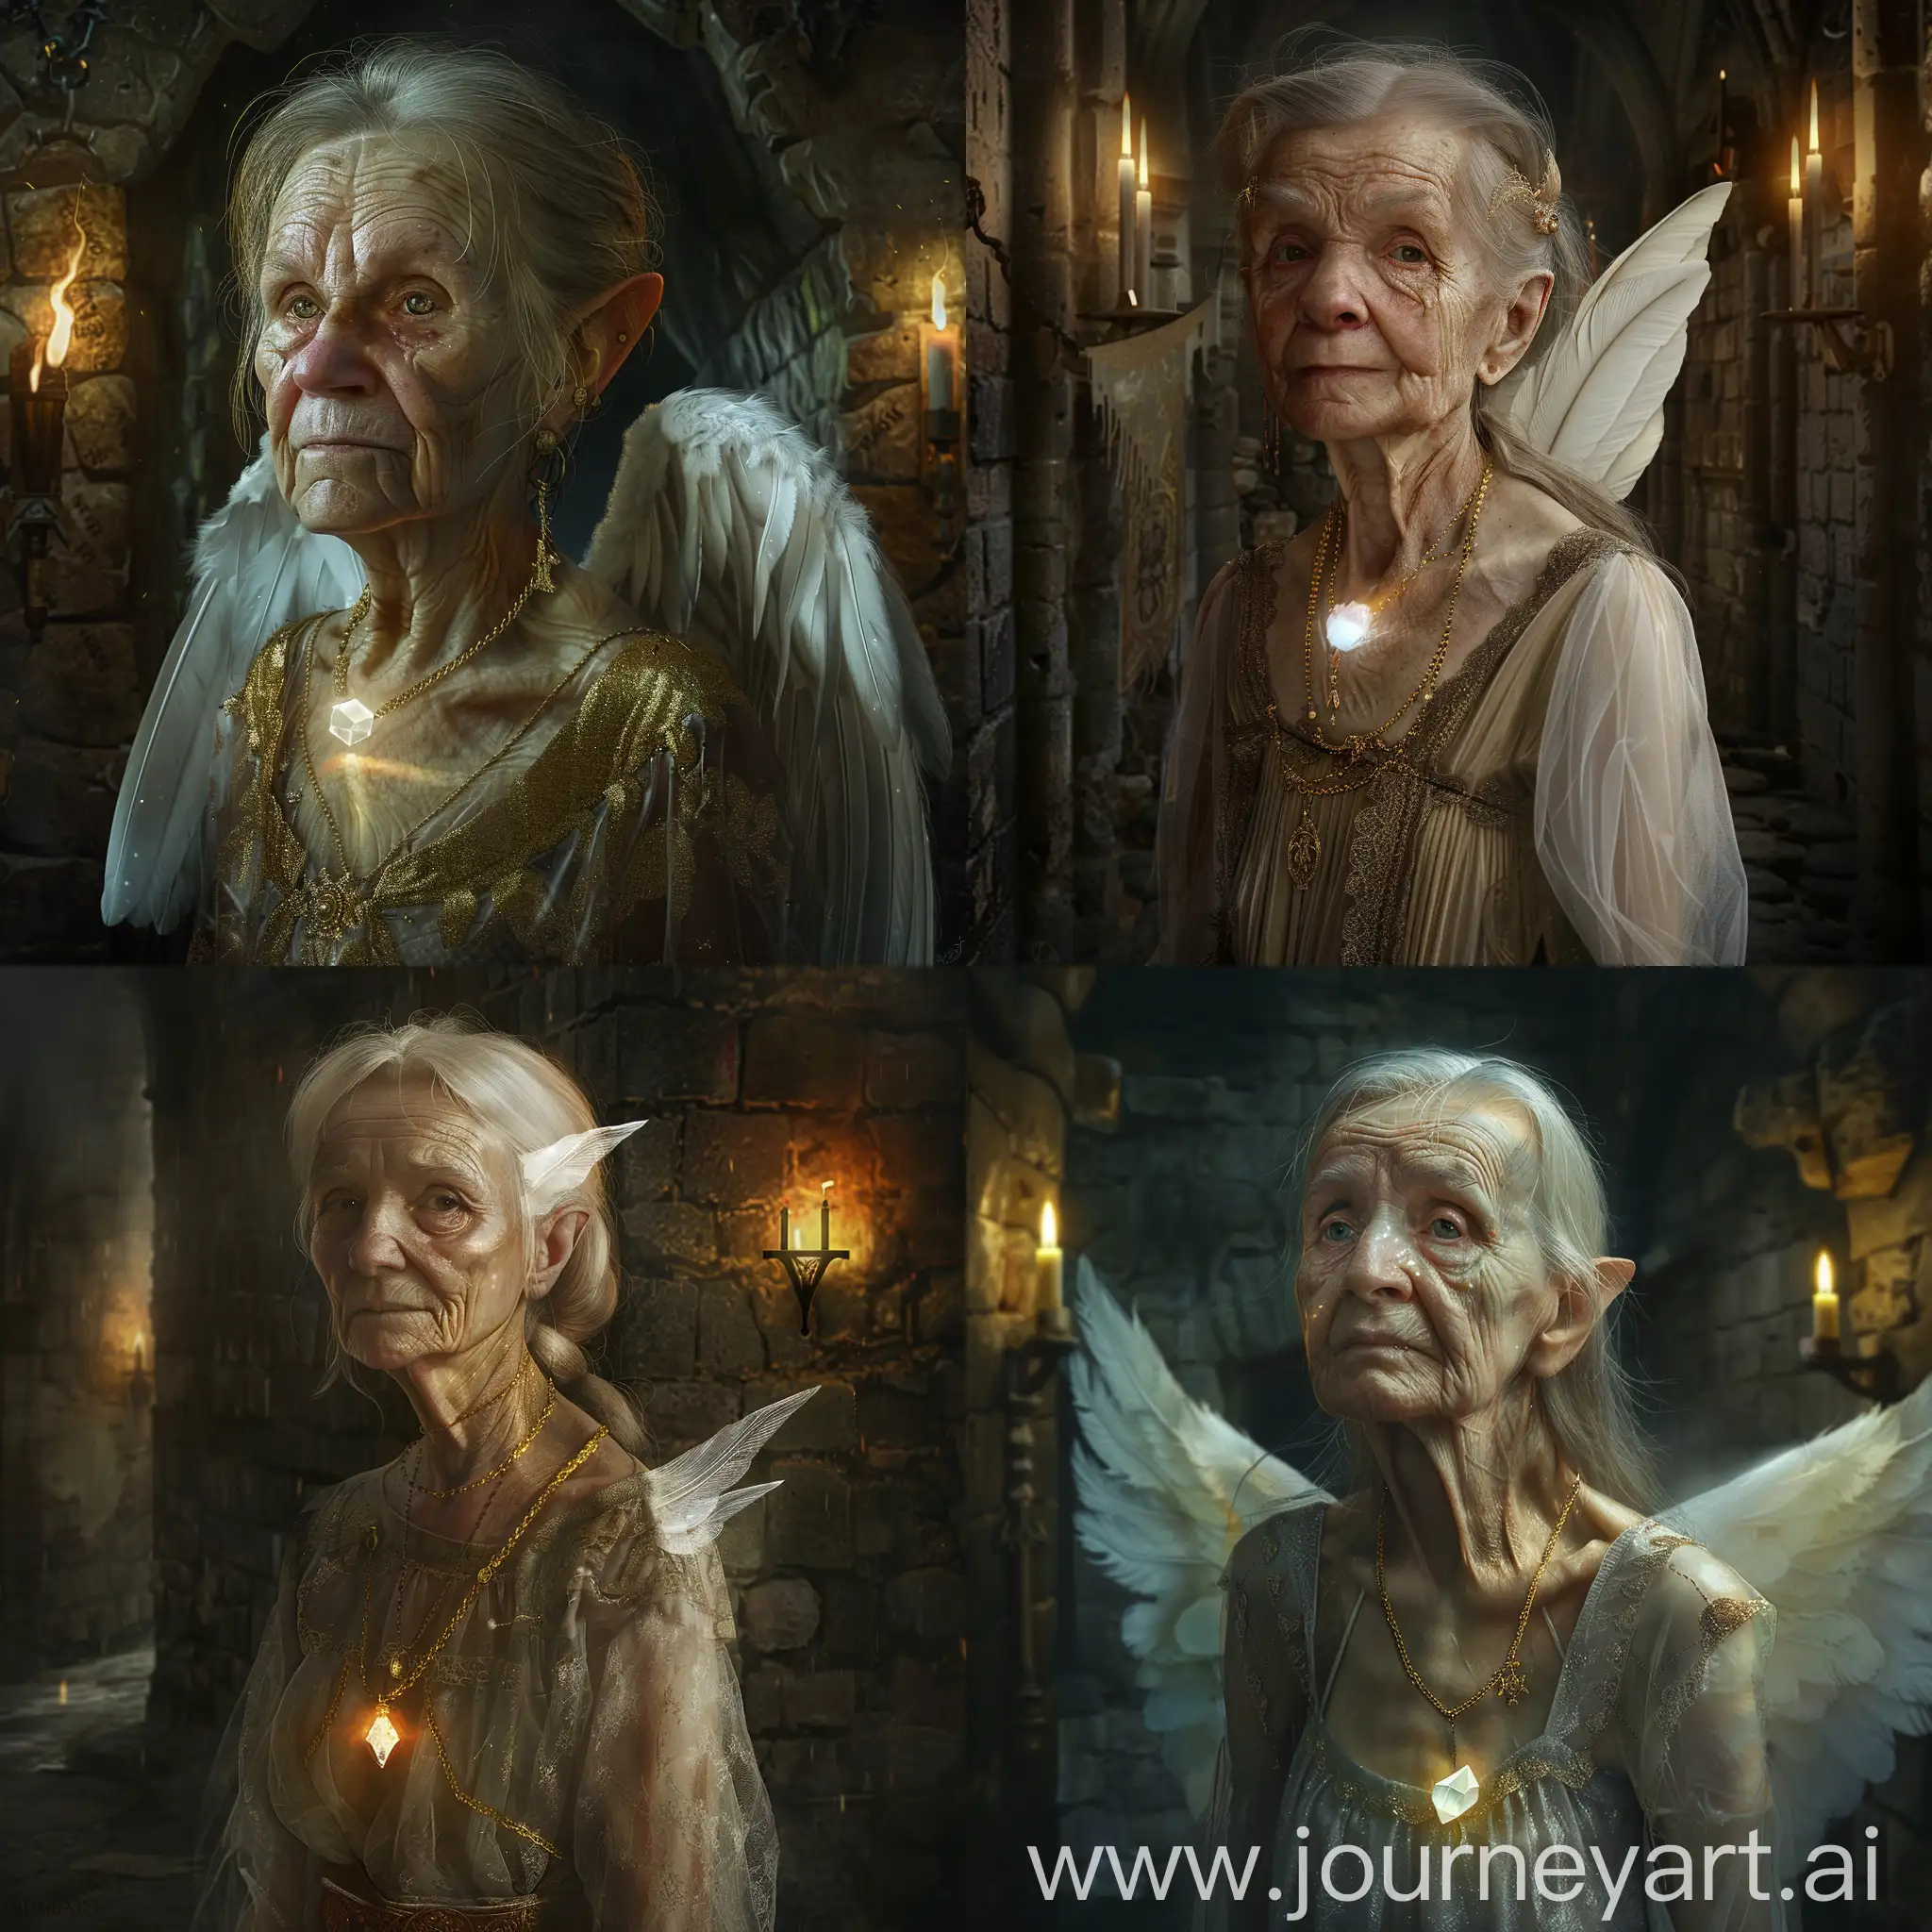 portait of 45-years old slavic girl with wrinkles, blonde hair, glowing small crystal on a gold chain around her neck, white wing on her back, transparent dress, medieval castle, walls, darkness, torches, dark fantasy